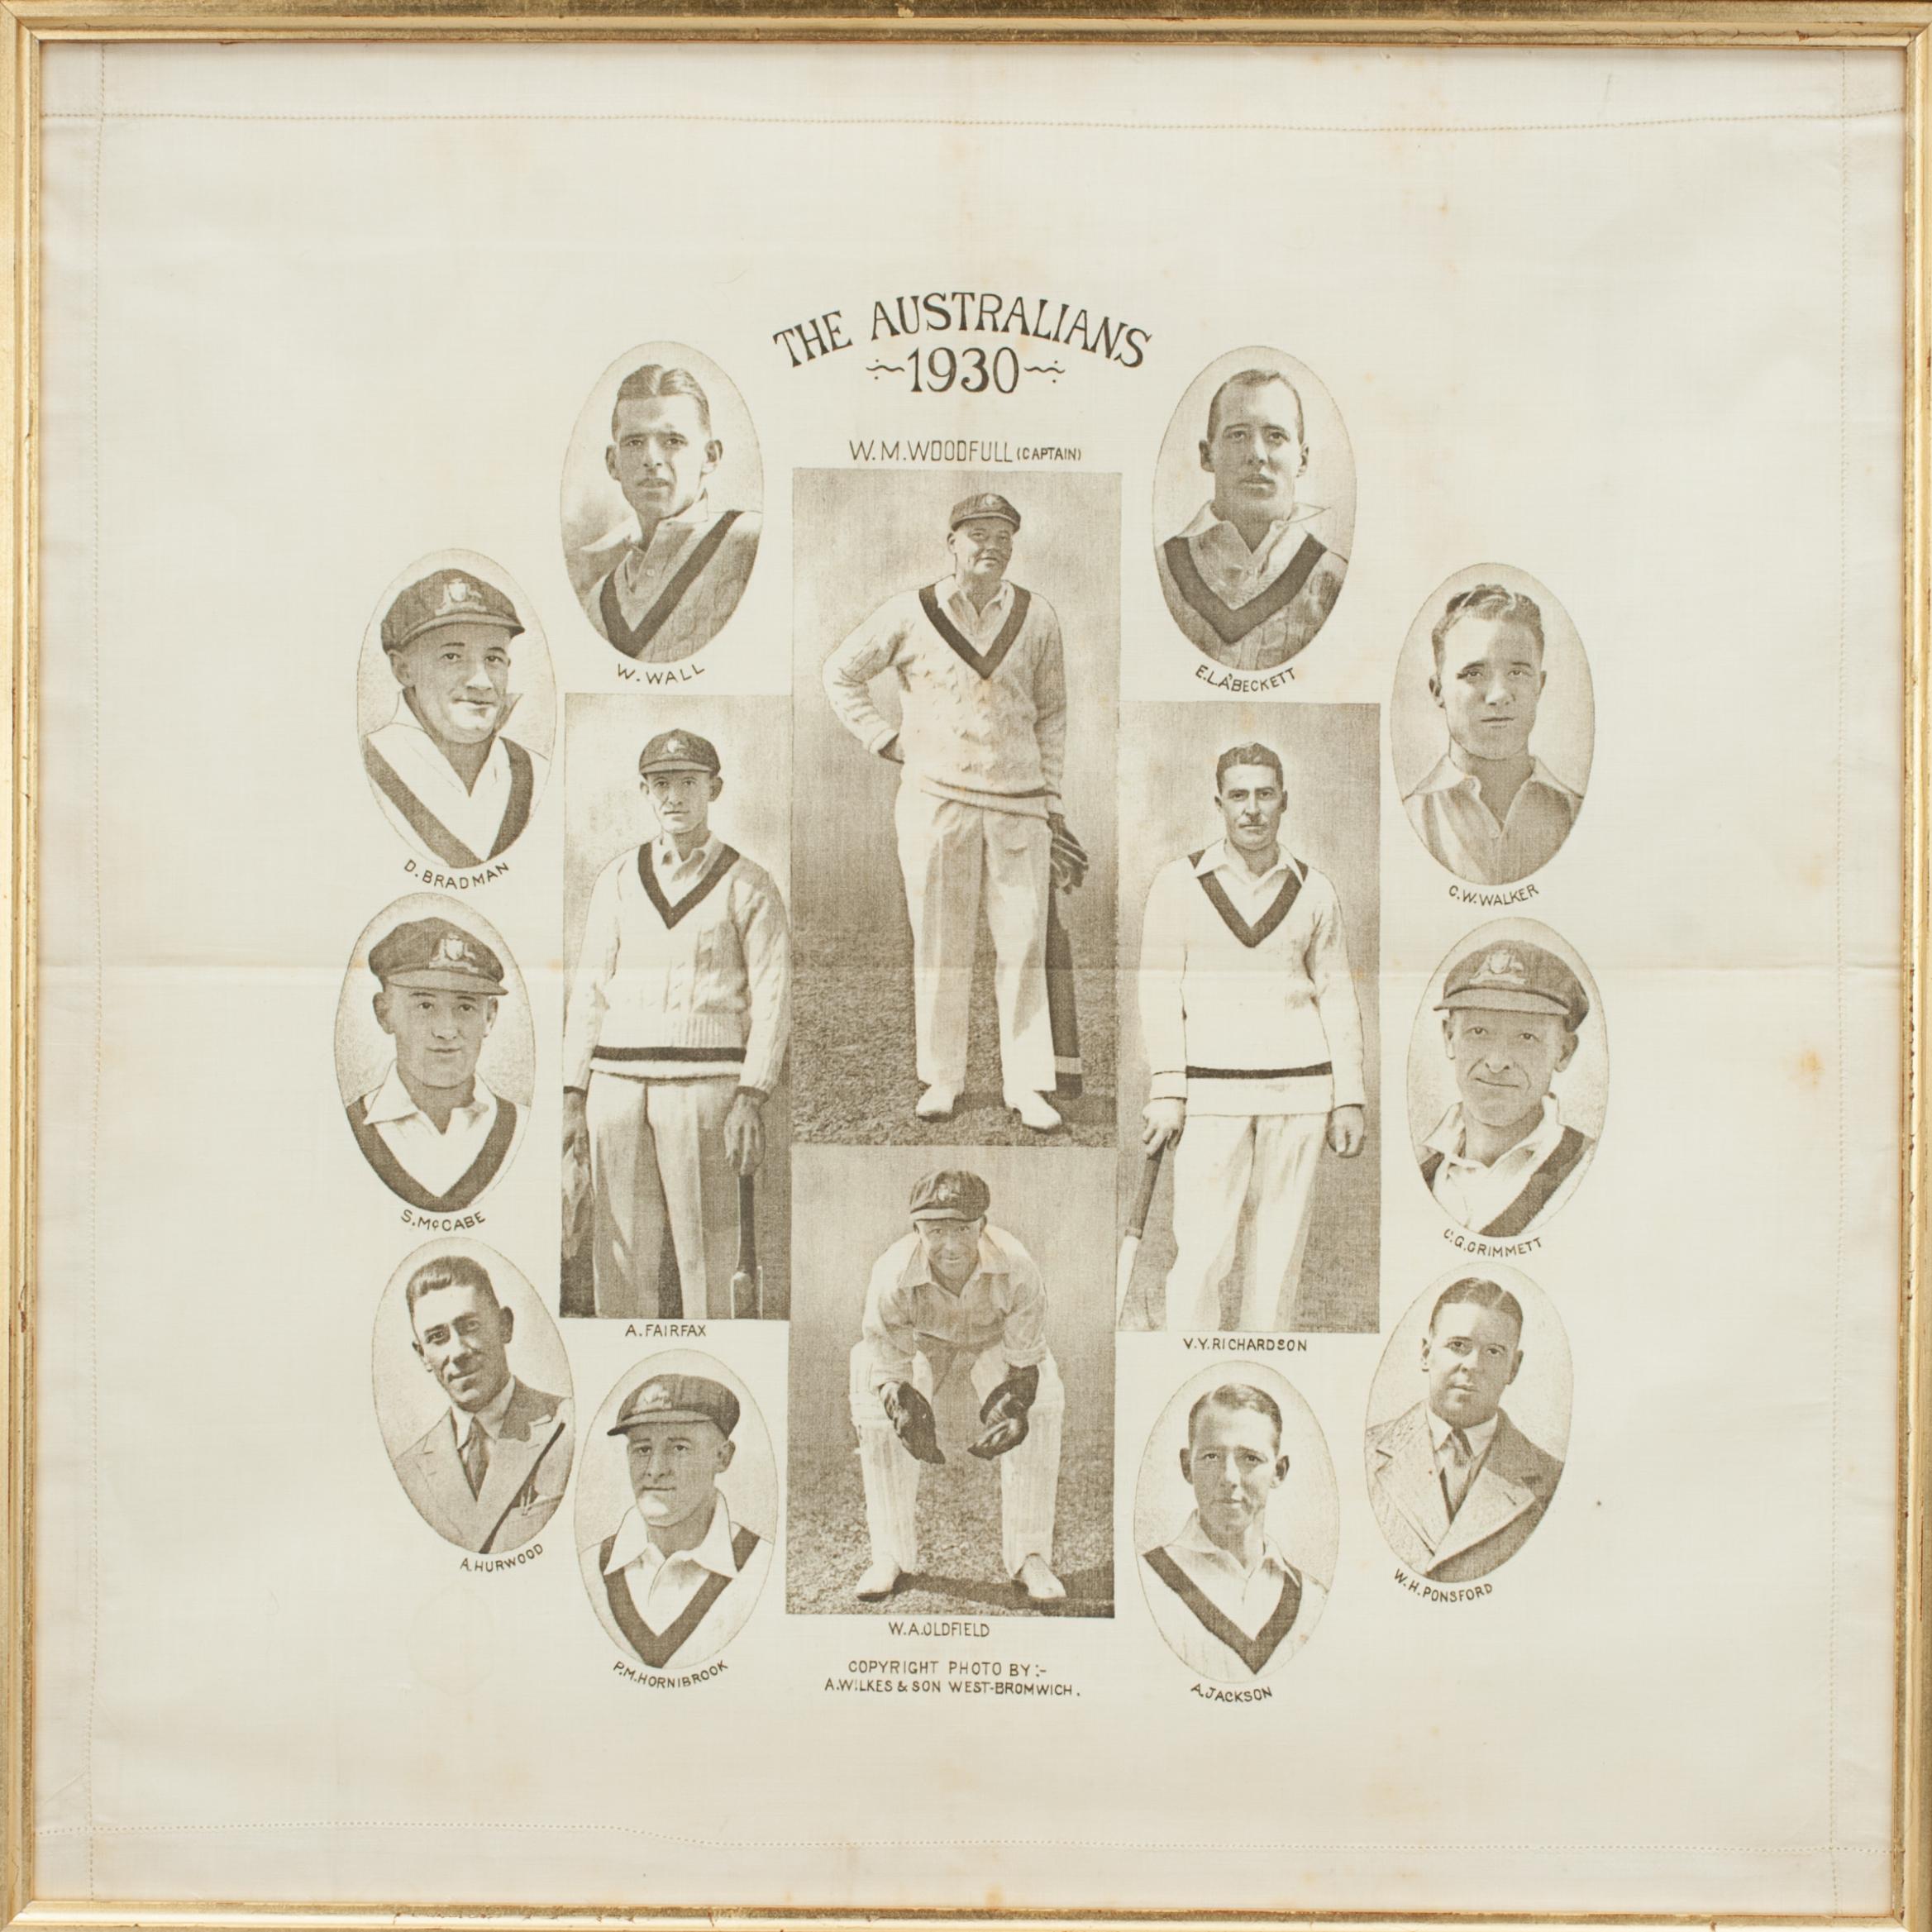 Commemorative 1930s Australian Cricket Handkerchief.
A gentleman's linen handkerchief produced to commemorate the 1930 tour of England by the Australian Test team captained by W.M. Woodful and within it's squad Australia's most famous cricketer -